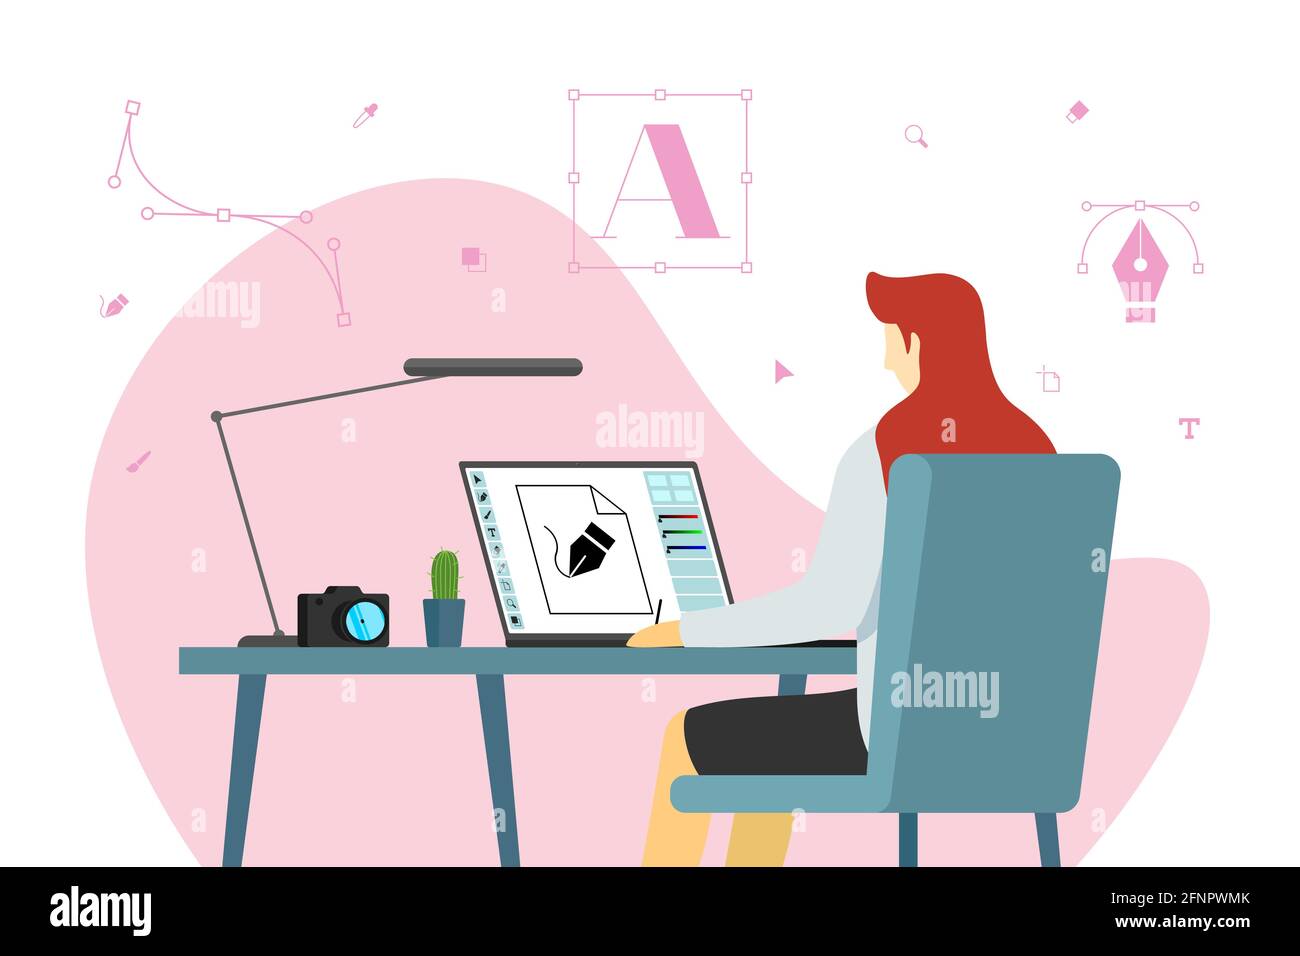 Woman graphic designer freelancer sits working at laptop in workplace. Female freelance creative specialist or advertising agency studio employee develops design layout on monitor screen illustration Stock Vector